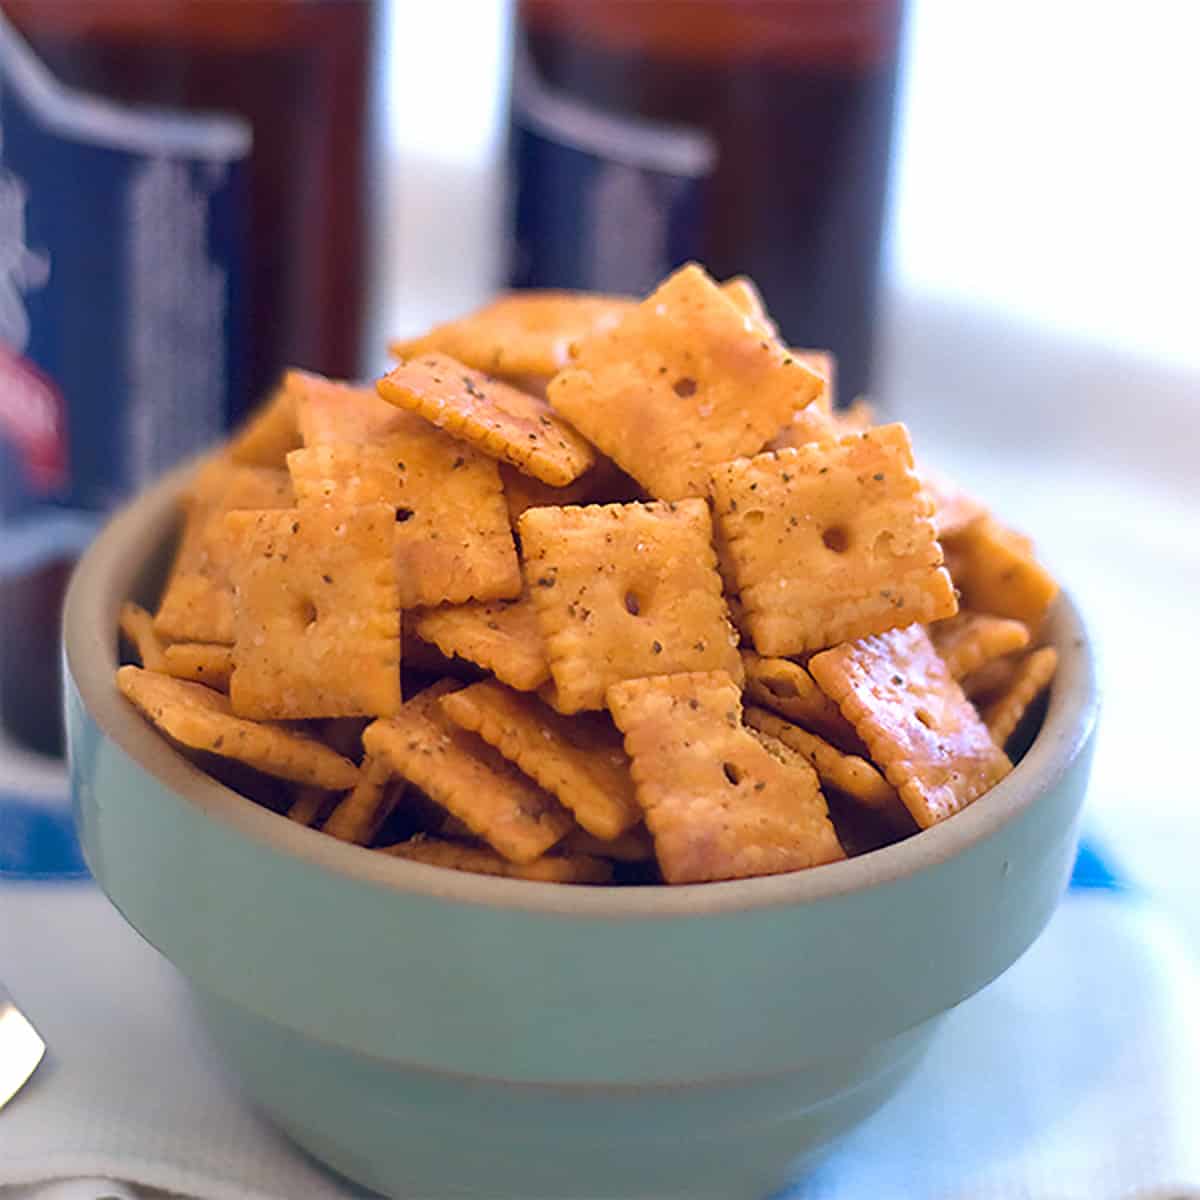 Spicy cheese crackers in a green vintage bowl.